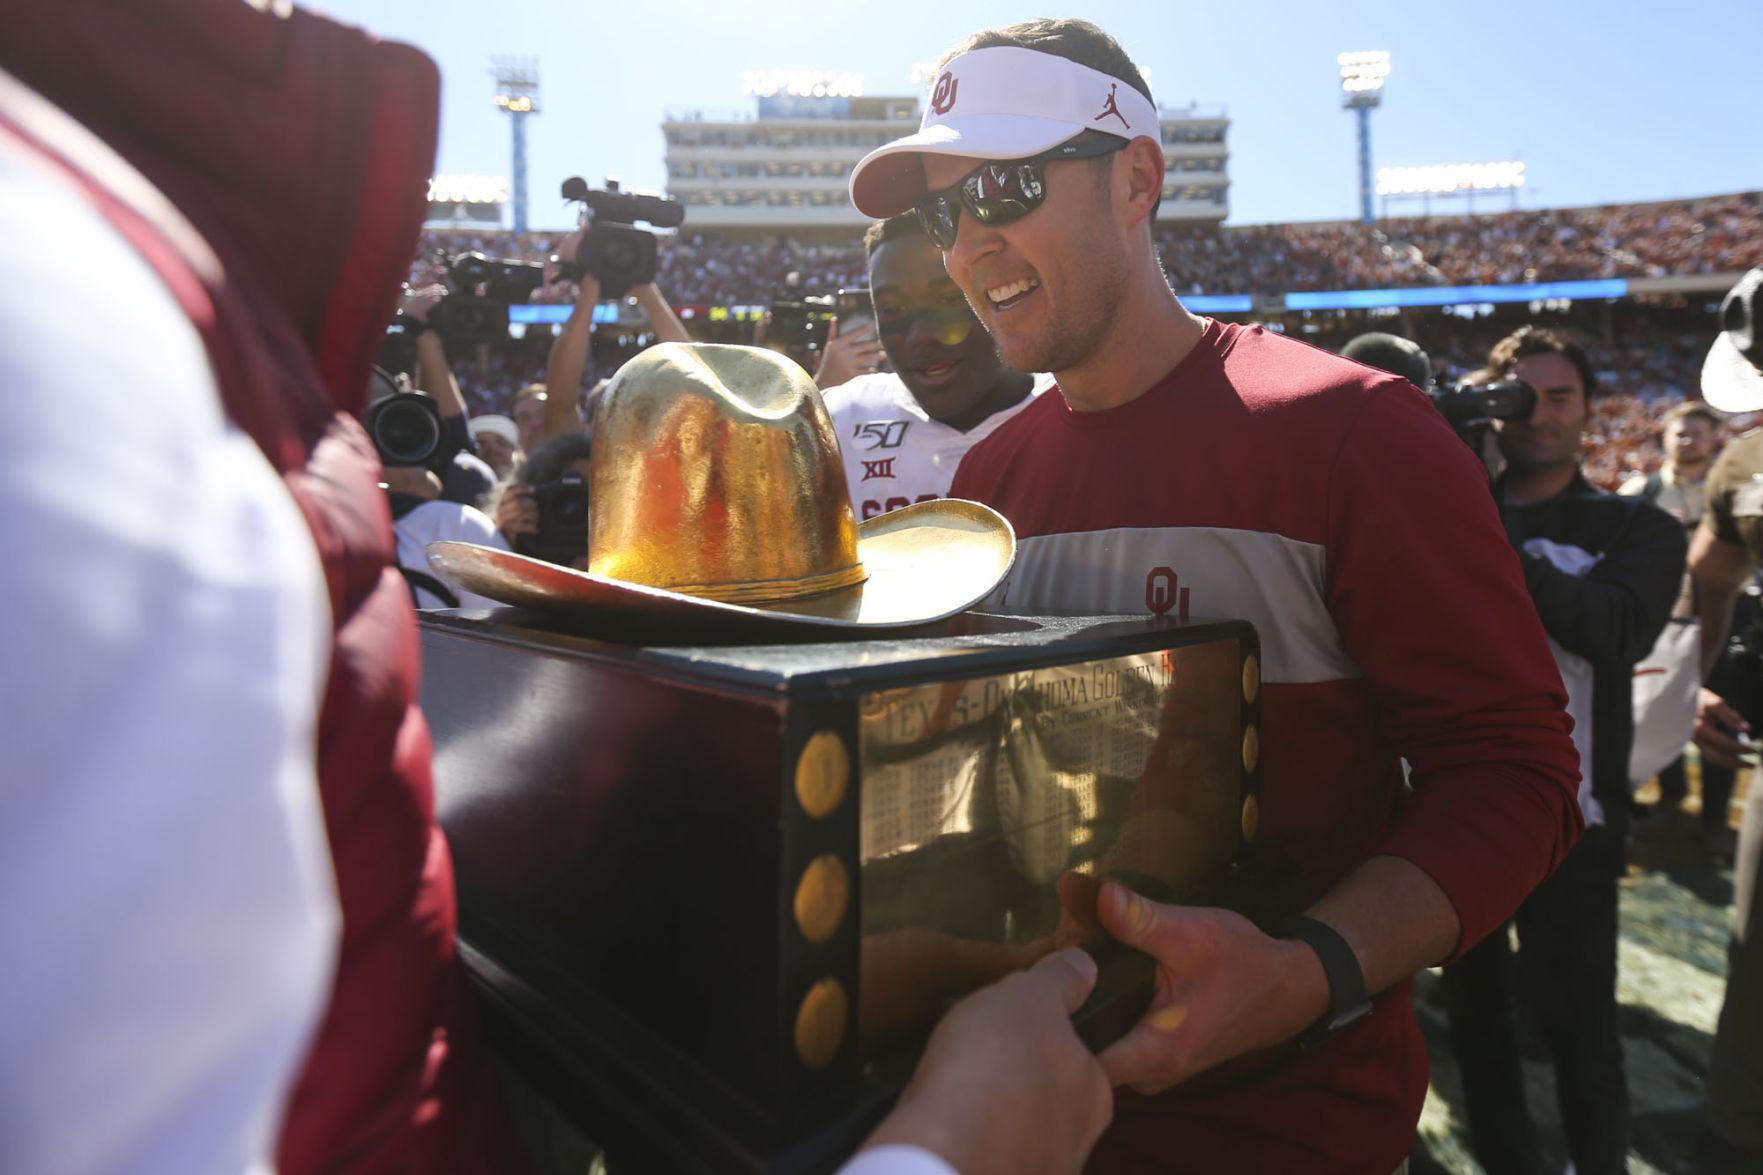 OU football Sooners celebrate after beating Texas in Red River